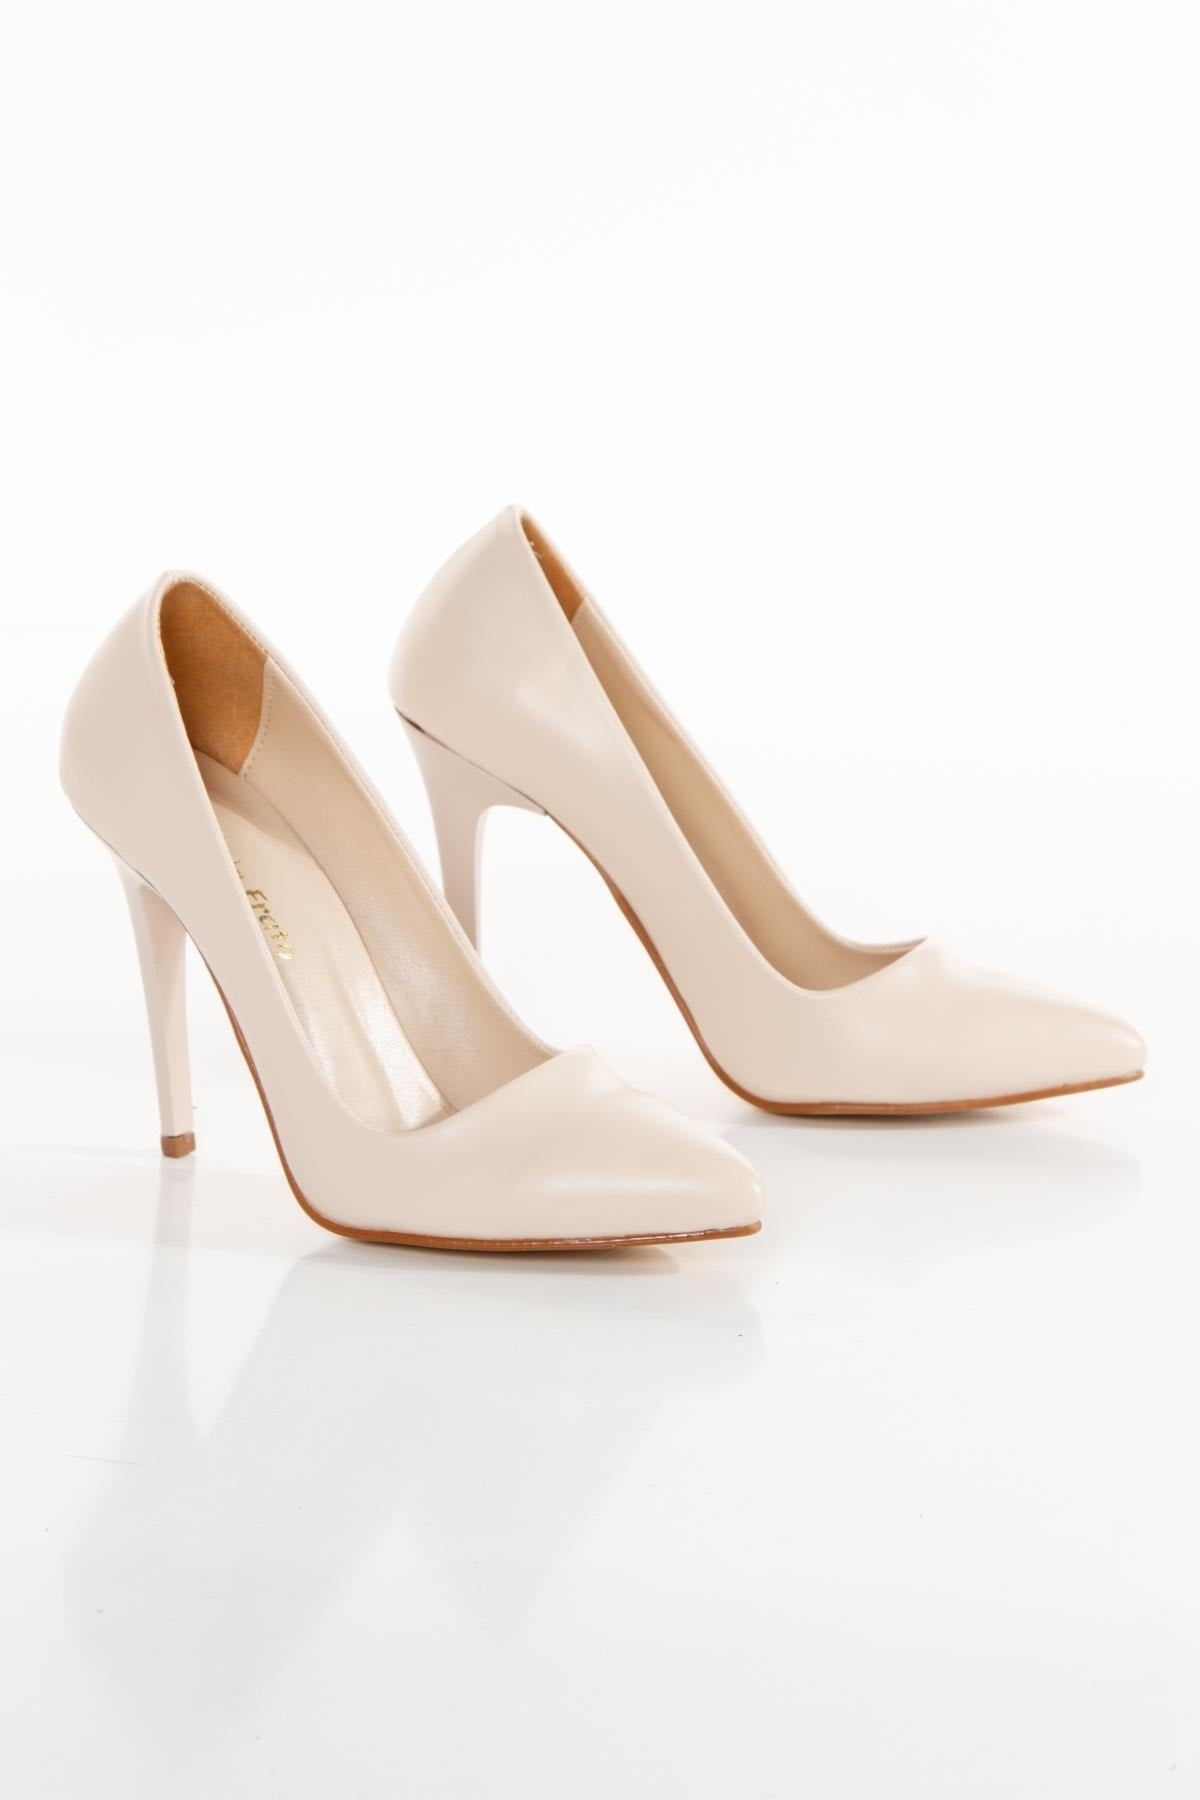 11 cm Futter Heels Stiletto Heeled Shoes Shoes Pointed Nose Cream